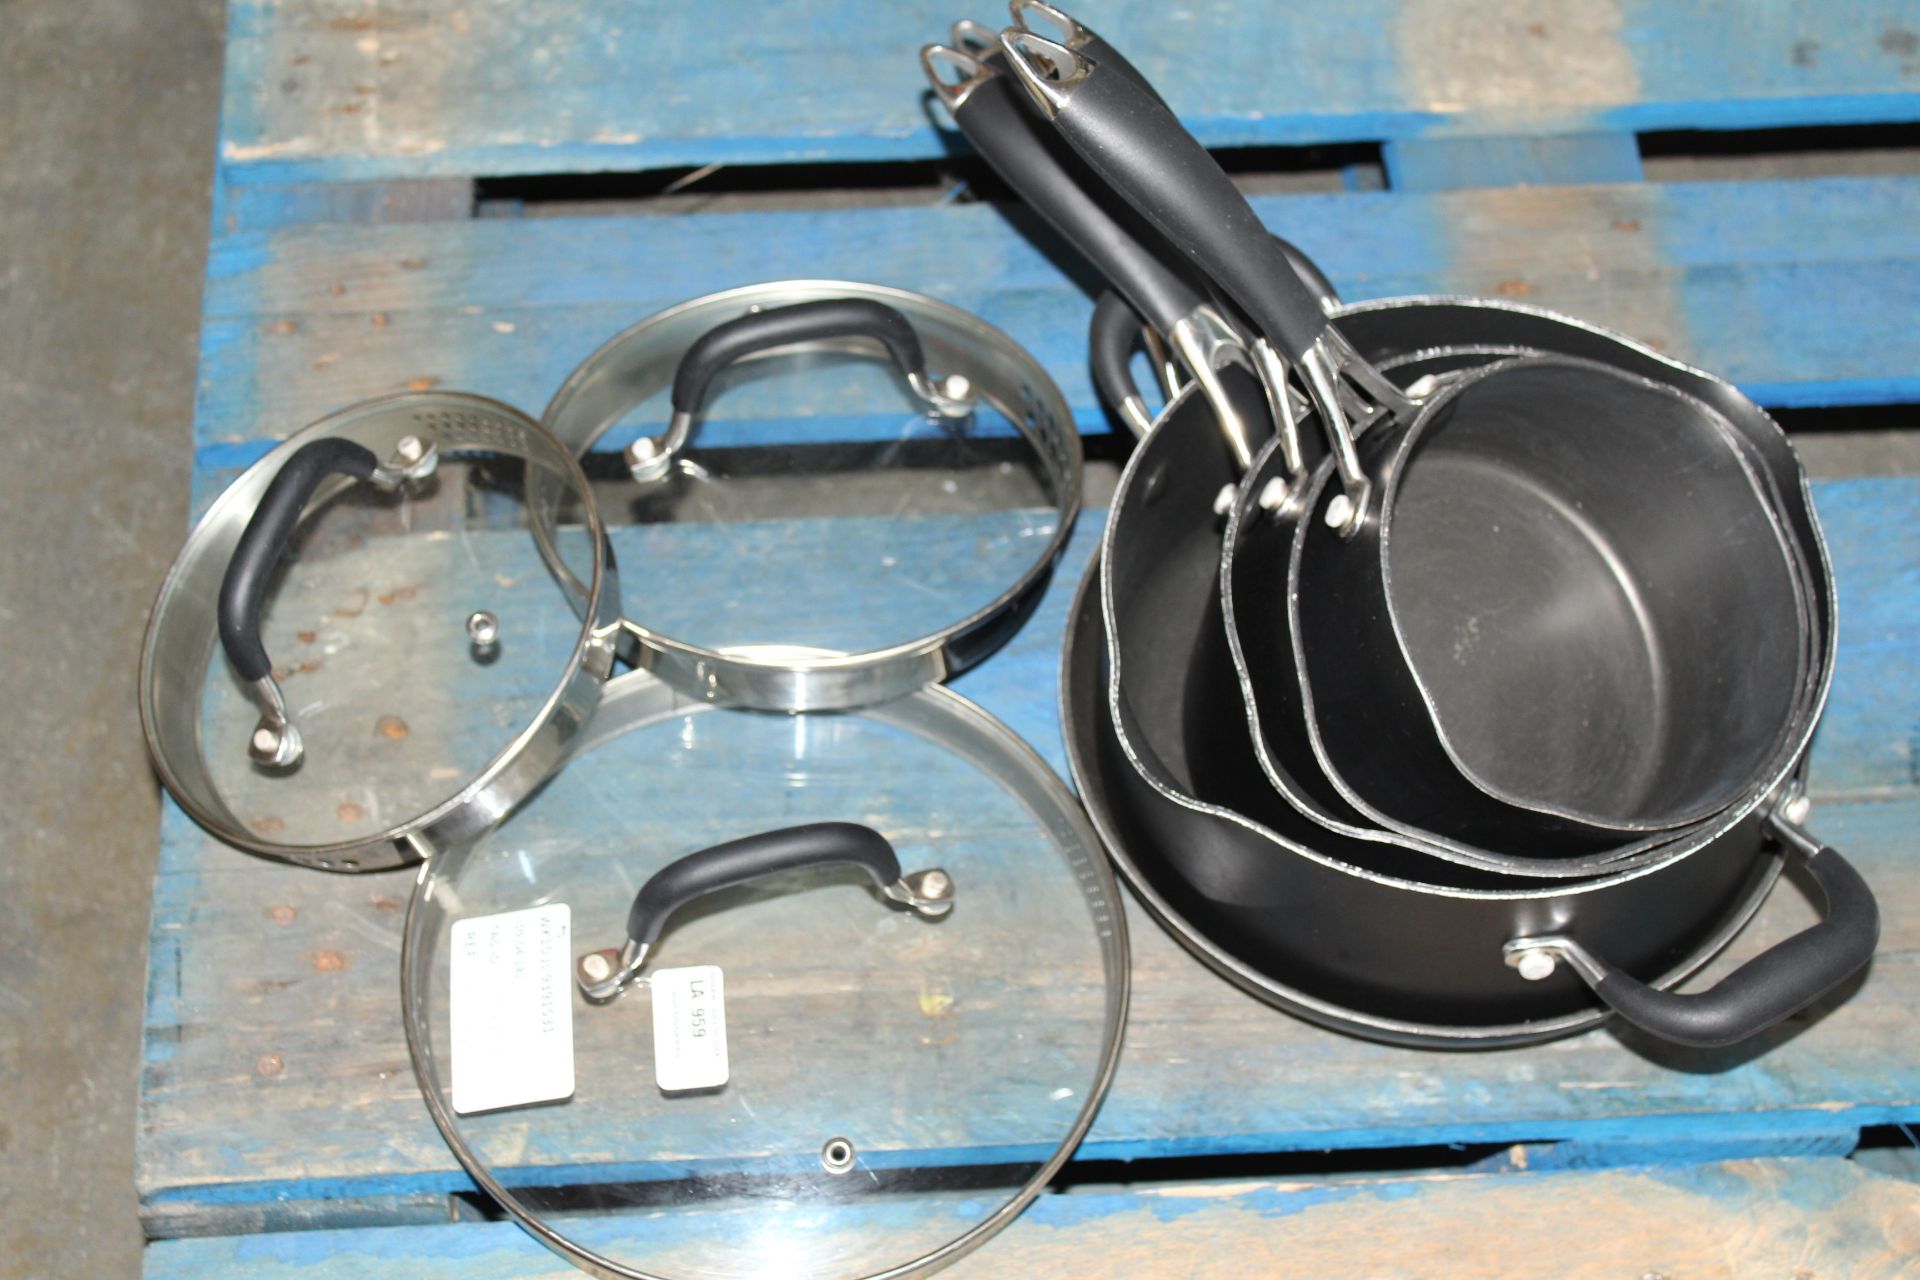 1 x 5 PIECE PAN SET RRP £120 (09.04.18) *PLEASE NOTE THAT THE BID PRICE IS MULTIPLIED BY THE